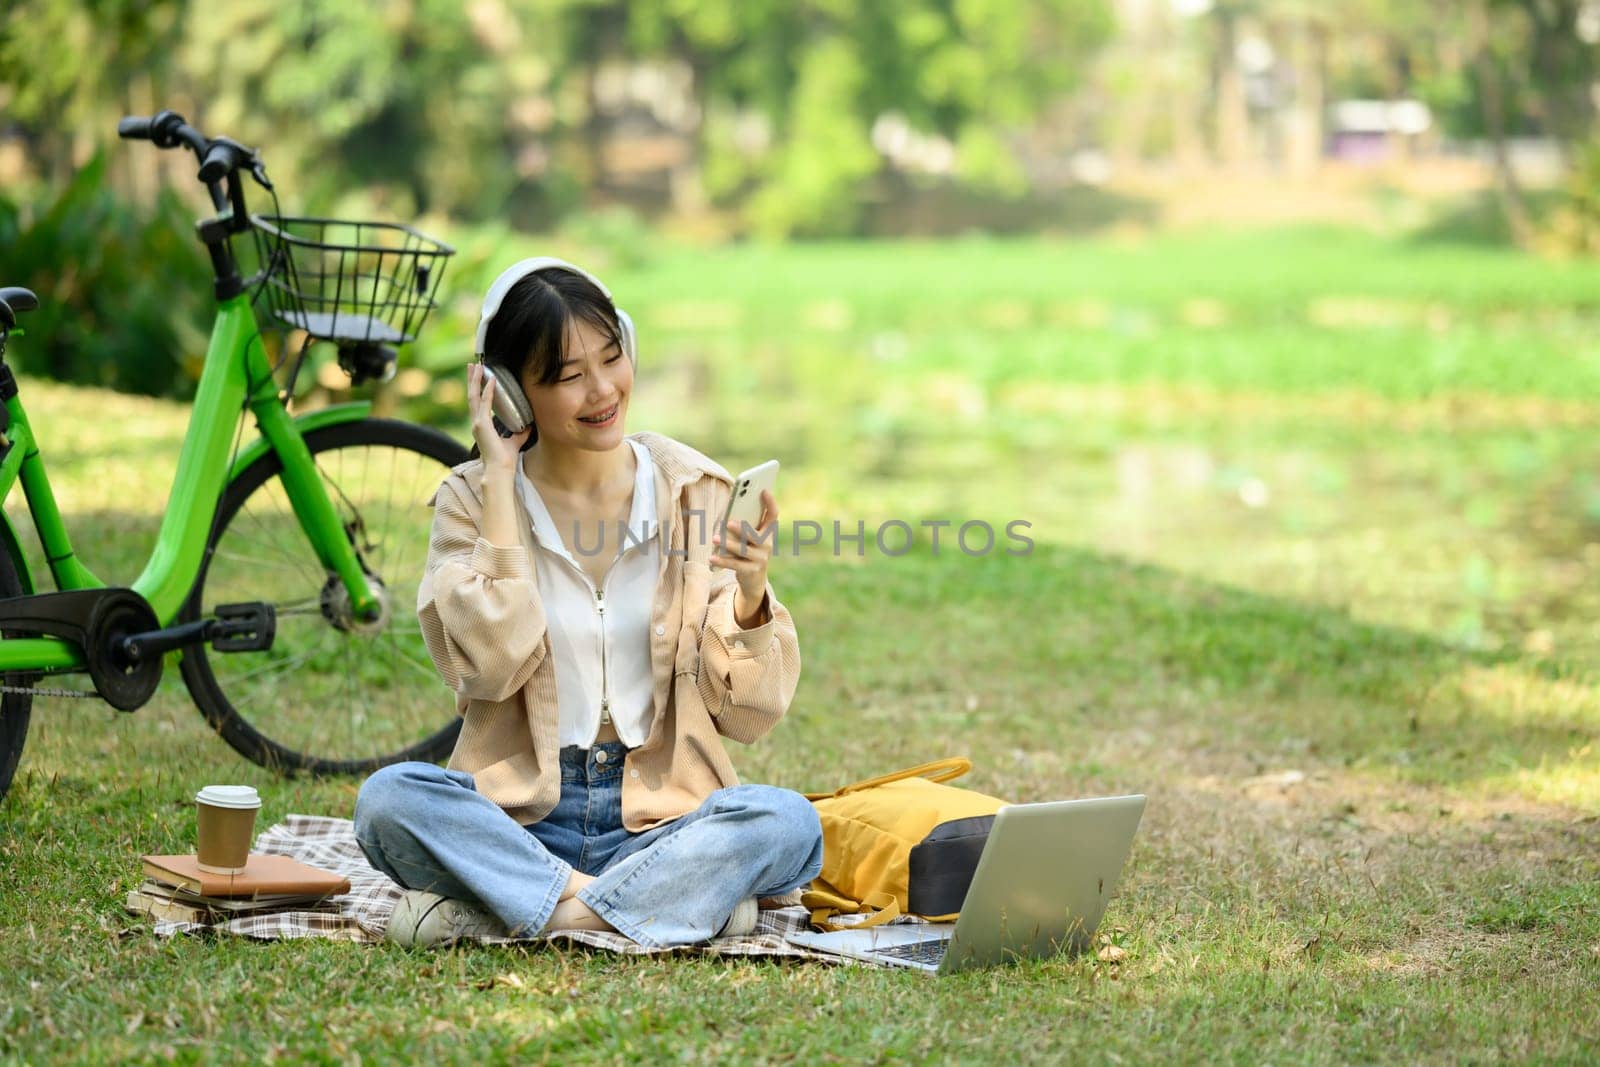 Happy young woman listening to music and using mobile phone on picnic blanket by prathanchorruangsak